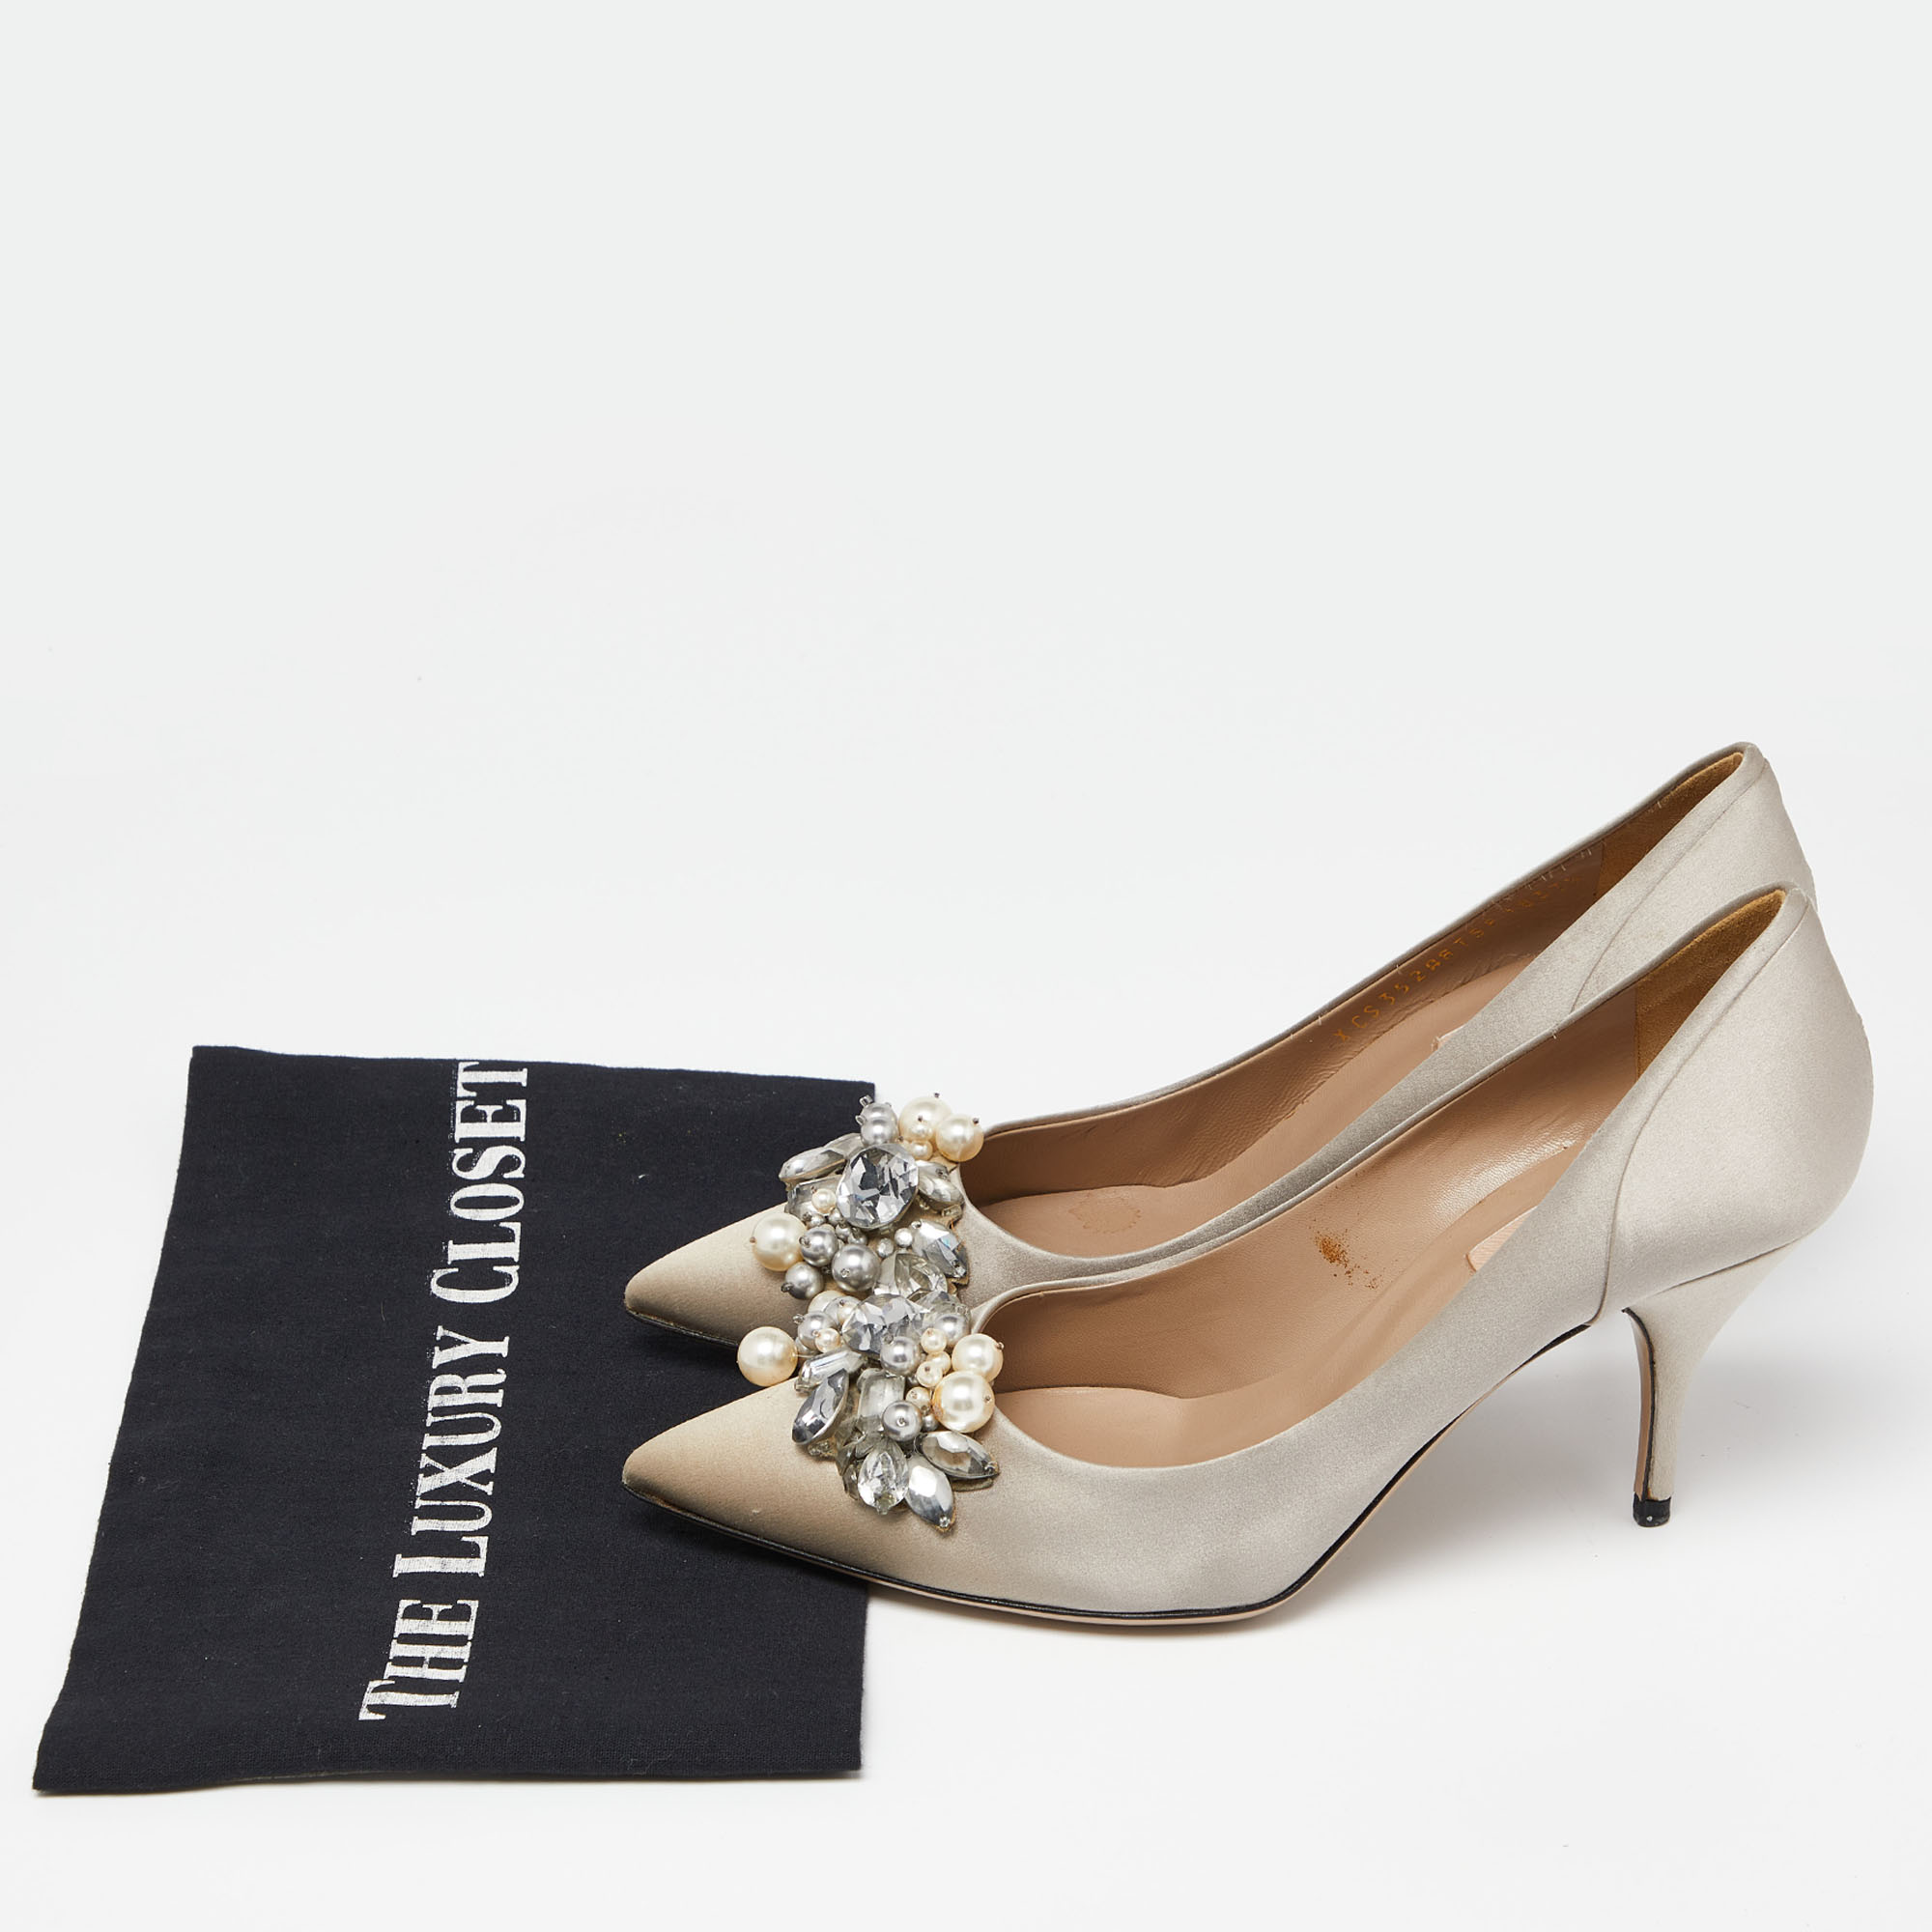 Valentino Grey Satin Crystal And Faux Pearl Embellished Pumps Size 37.5